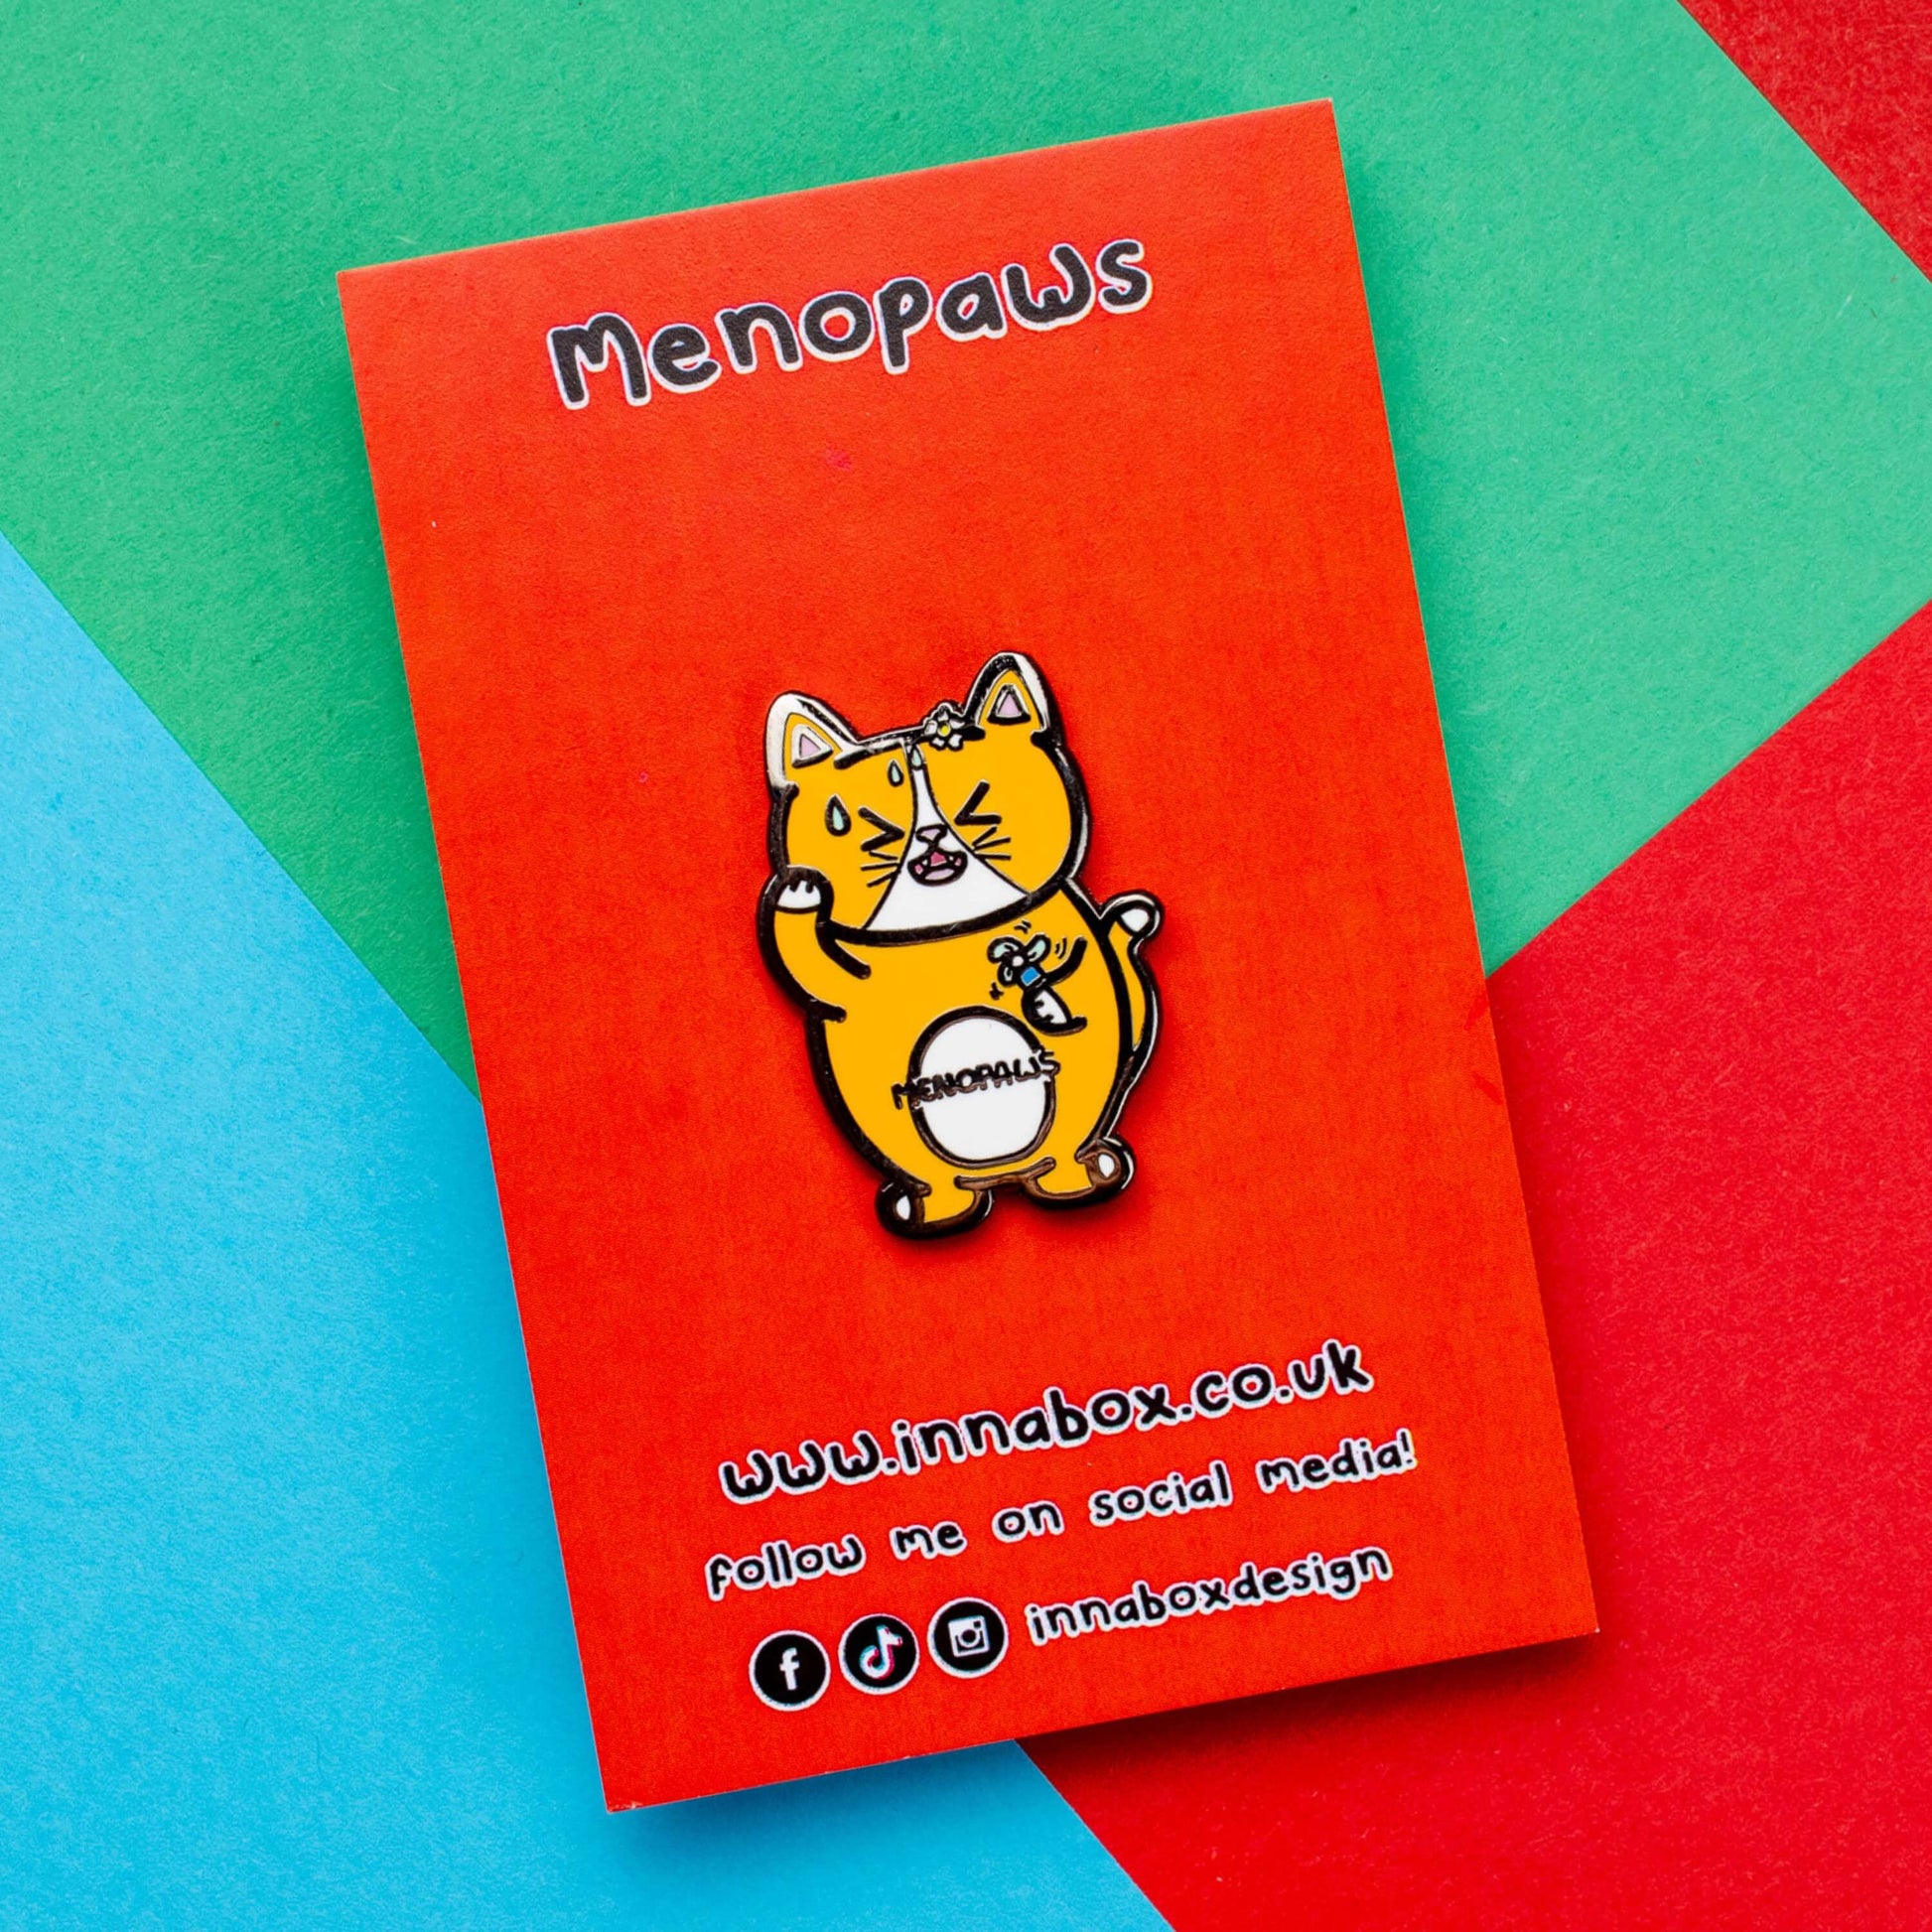 Menopaws Enamel Pin - Menopause on red backing card laid on a red, blue and green card background. The enamel pin is of a menopausal ginger and white cat with a daisy in it's hair. The cat is holding an electric fan and is looking hot with sweat droplets on it's face. Hand drawn design made to raise awareness for menopause.